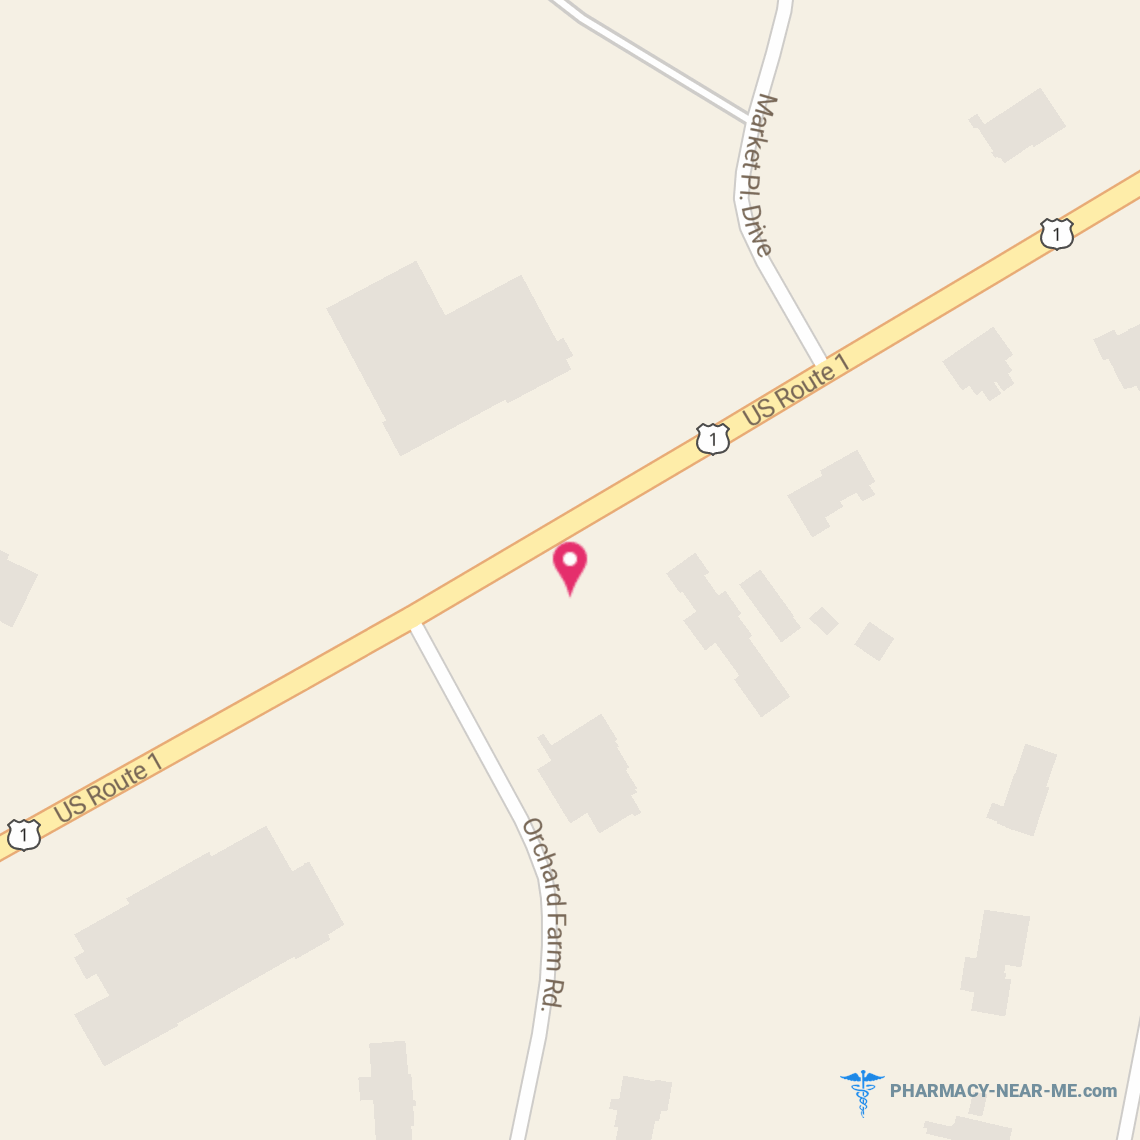 YORK HOSPITAL PHARMACY - Pharmacy Hours, Phone, Reviews & Information: 343 US Route 1, York, Maine 03909, United States